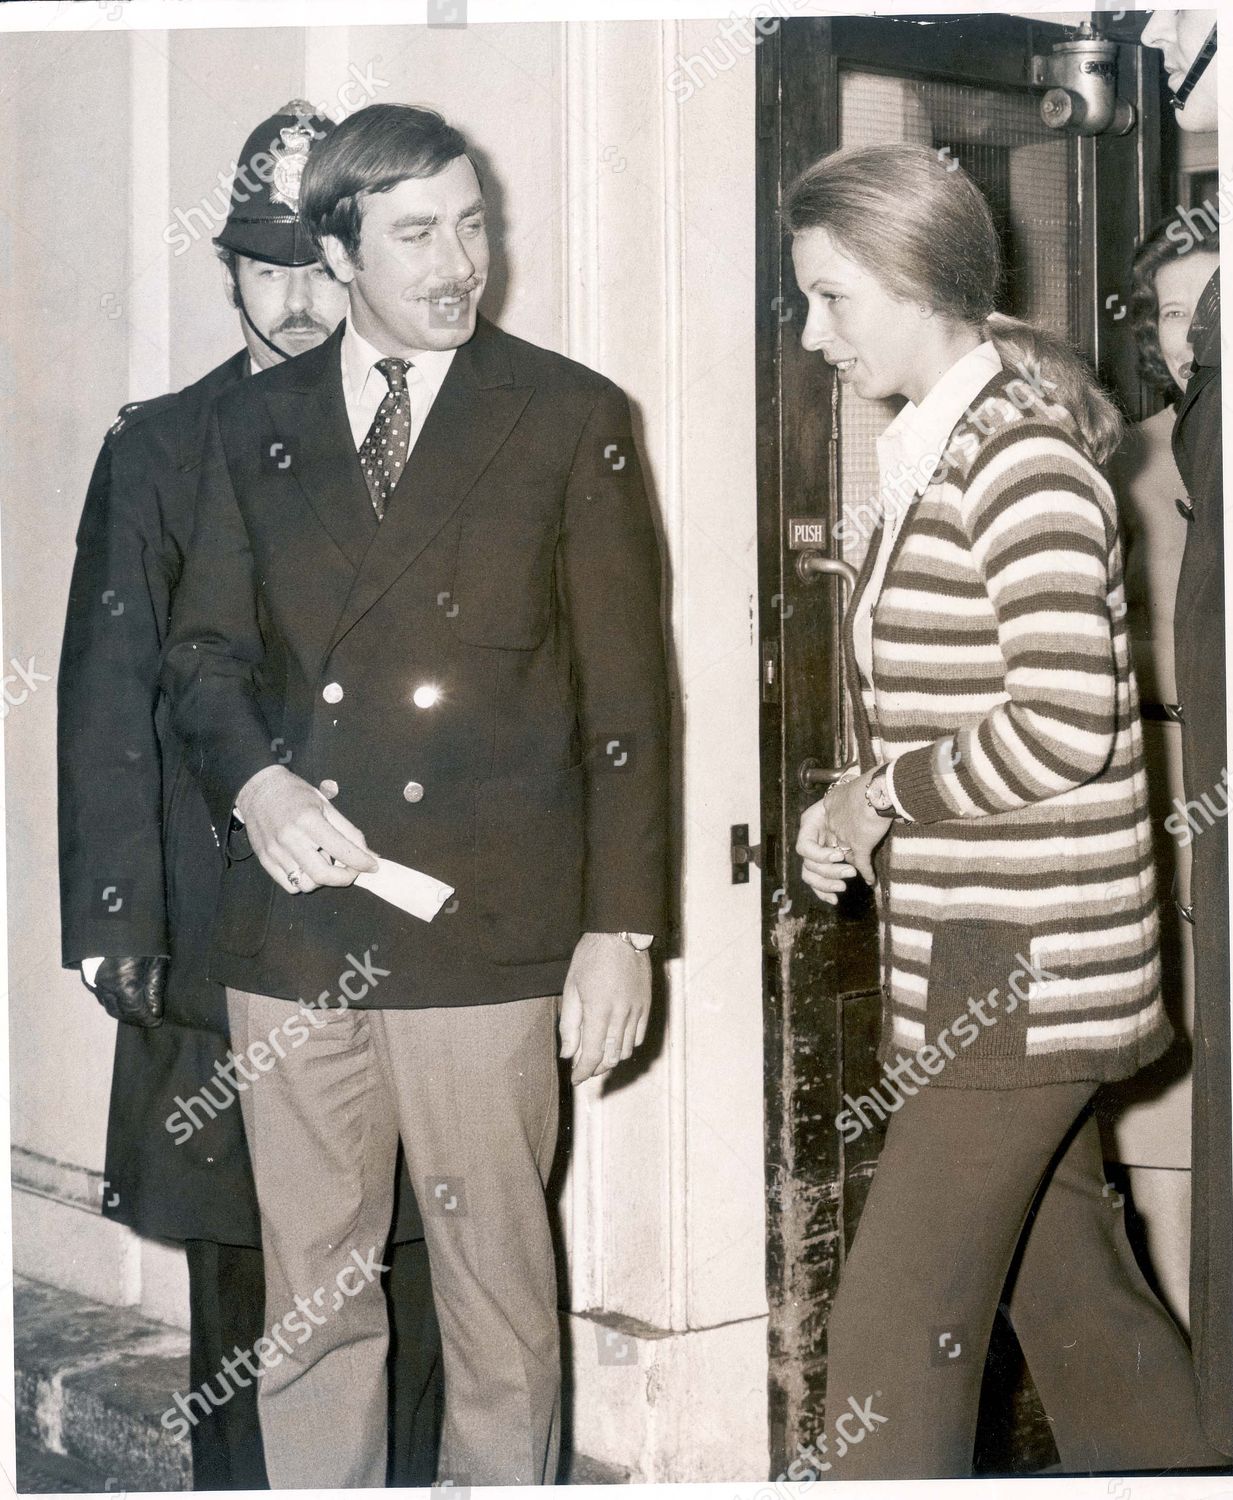 princess-anne-now-princess-royal-1974-picture-shows-princess-anne-leaving-westminster-hospital-with-her-detective-chris-hagon-she-vivited-her-bodyguard-james-beaton-who-had-been-injured-during-the-shooting-on-the-mall-shutterstock-editorial-890962a.jpg